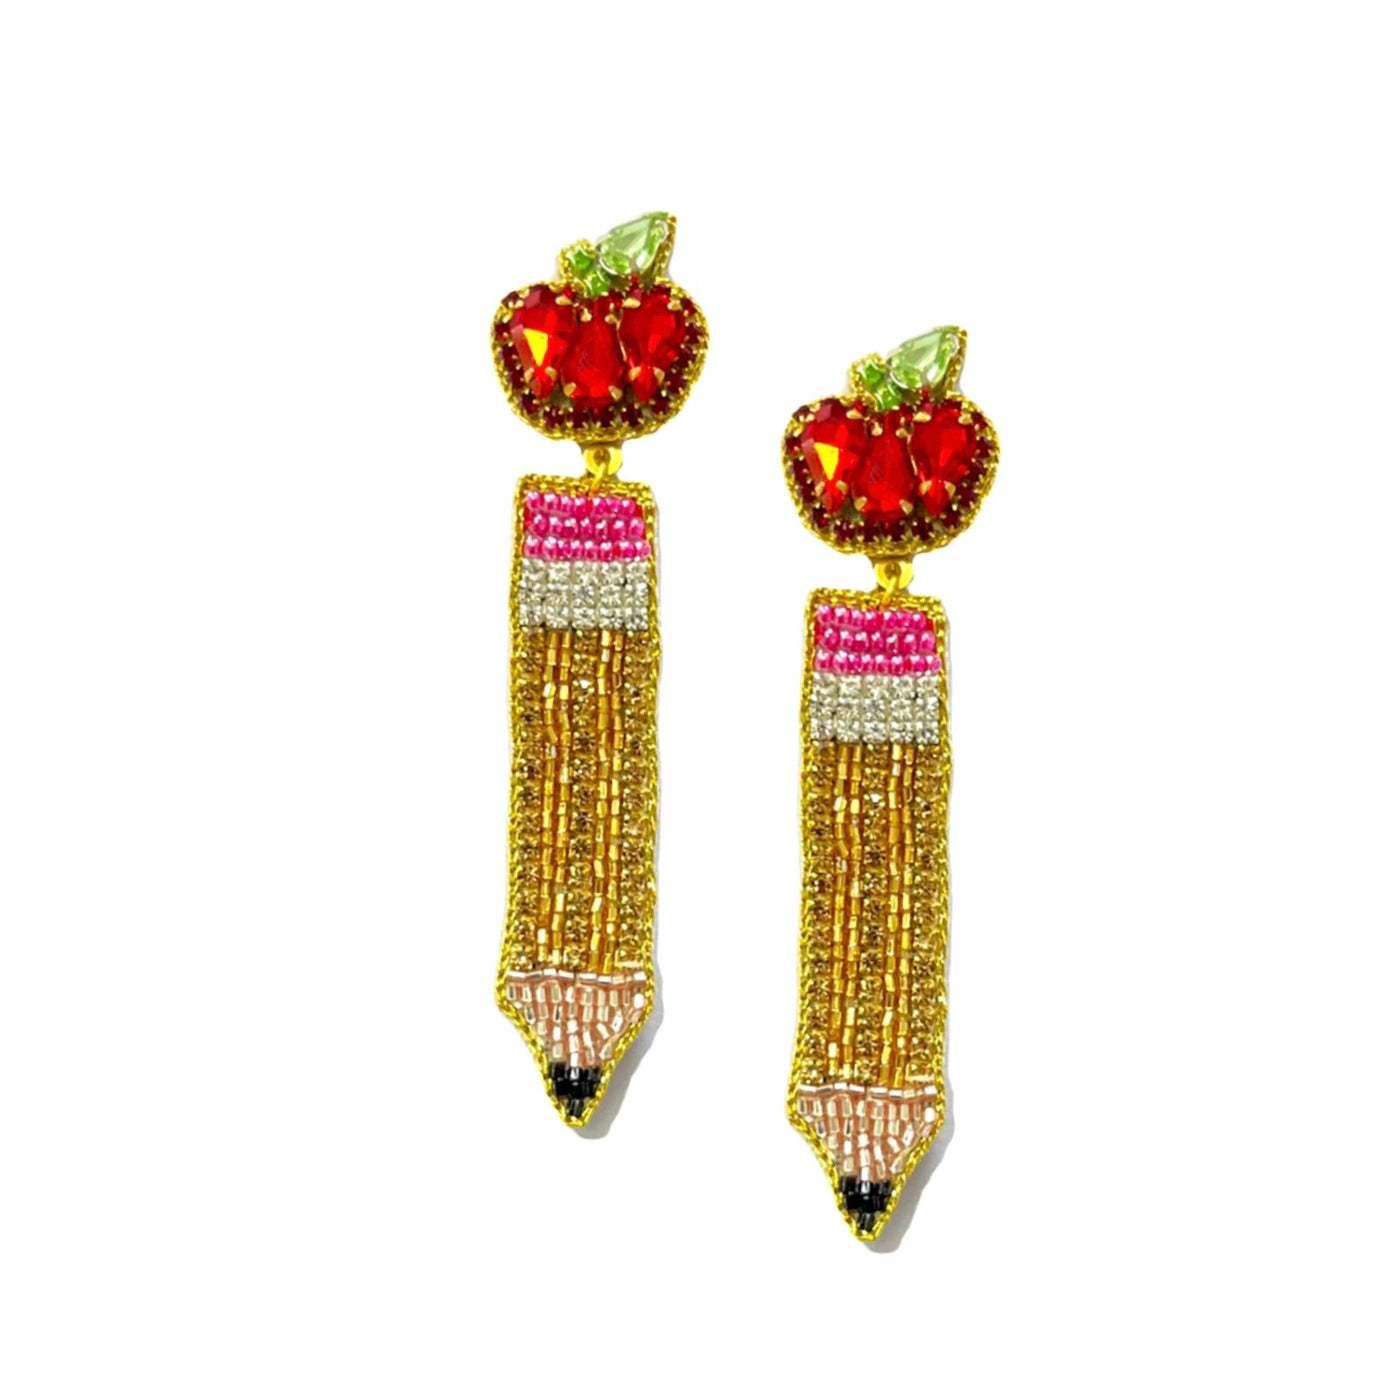 Pencil with Apple Earrings